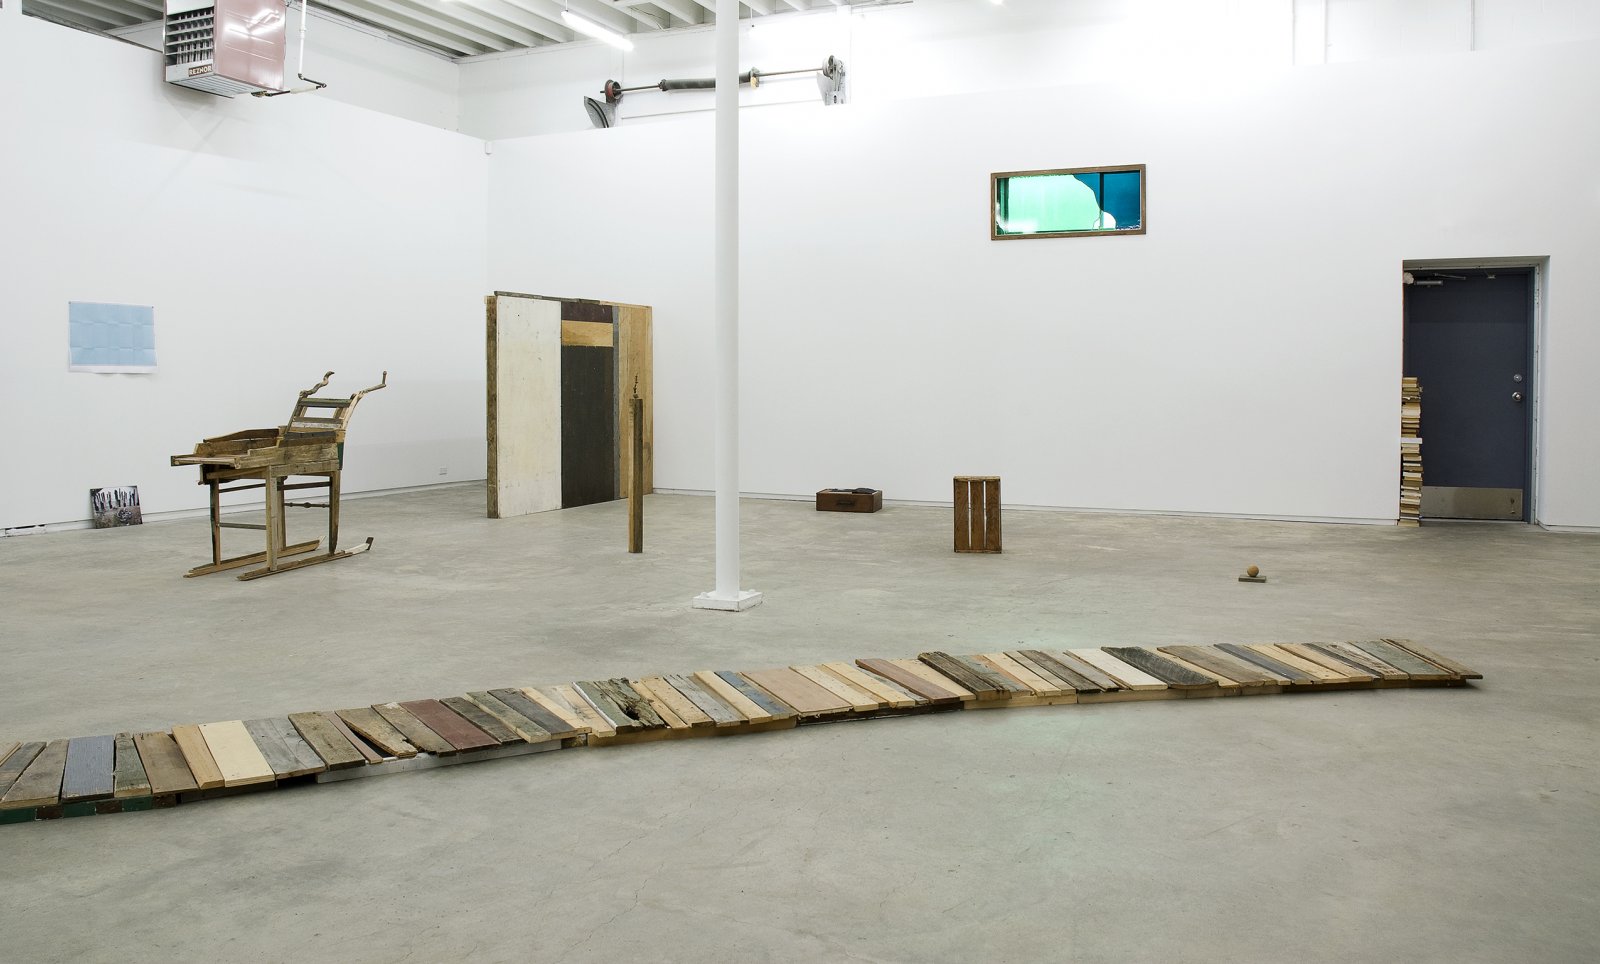 Gareth Moore, installation view, Uncertain Pilgrimage, Catriona Jeffries, 2009 ​​ by Ashes Withyman